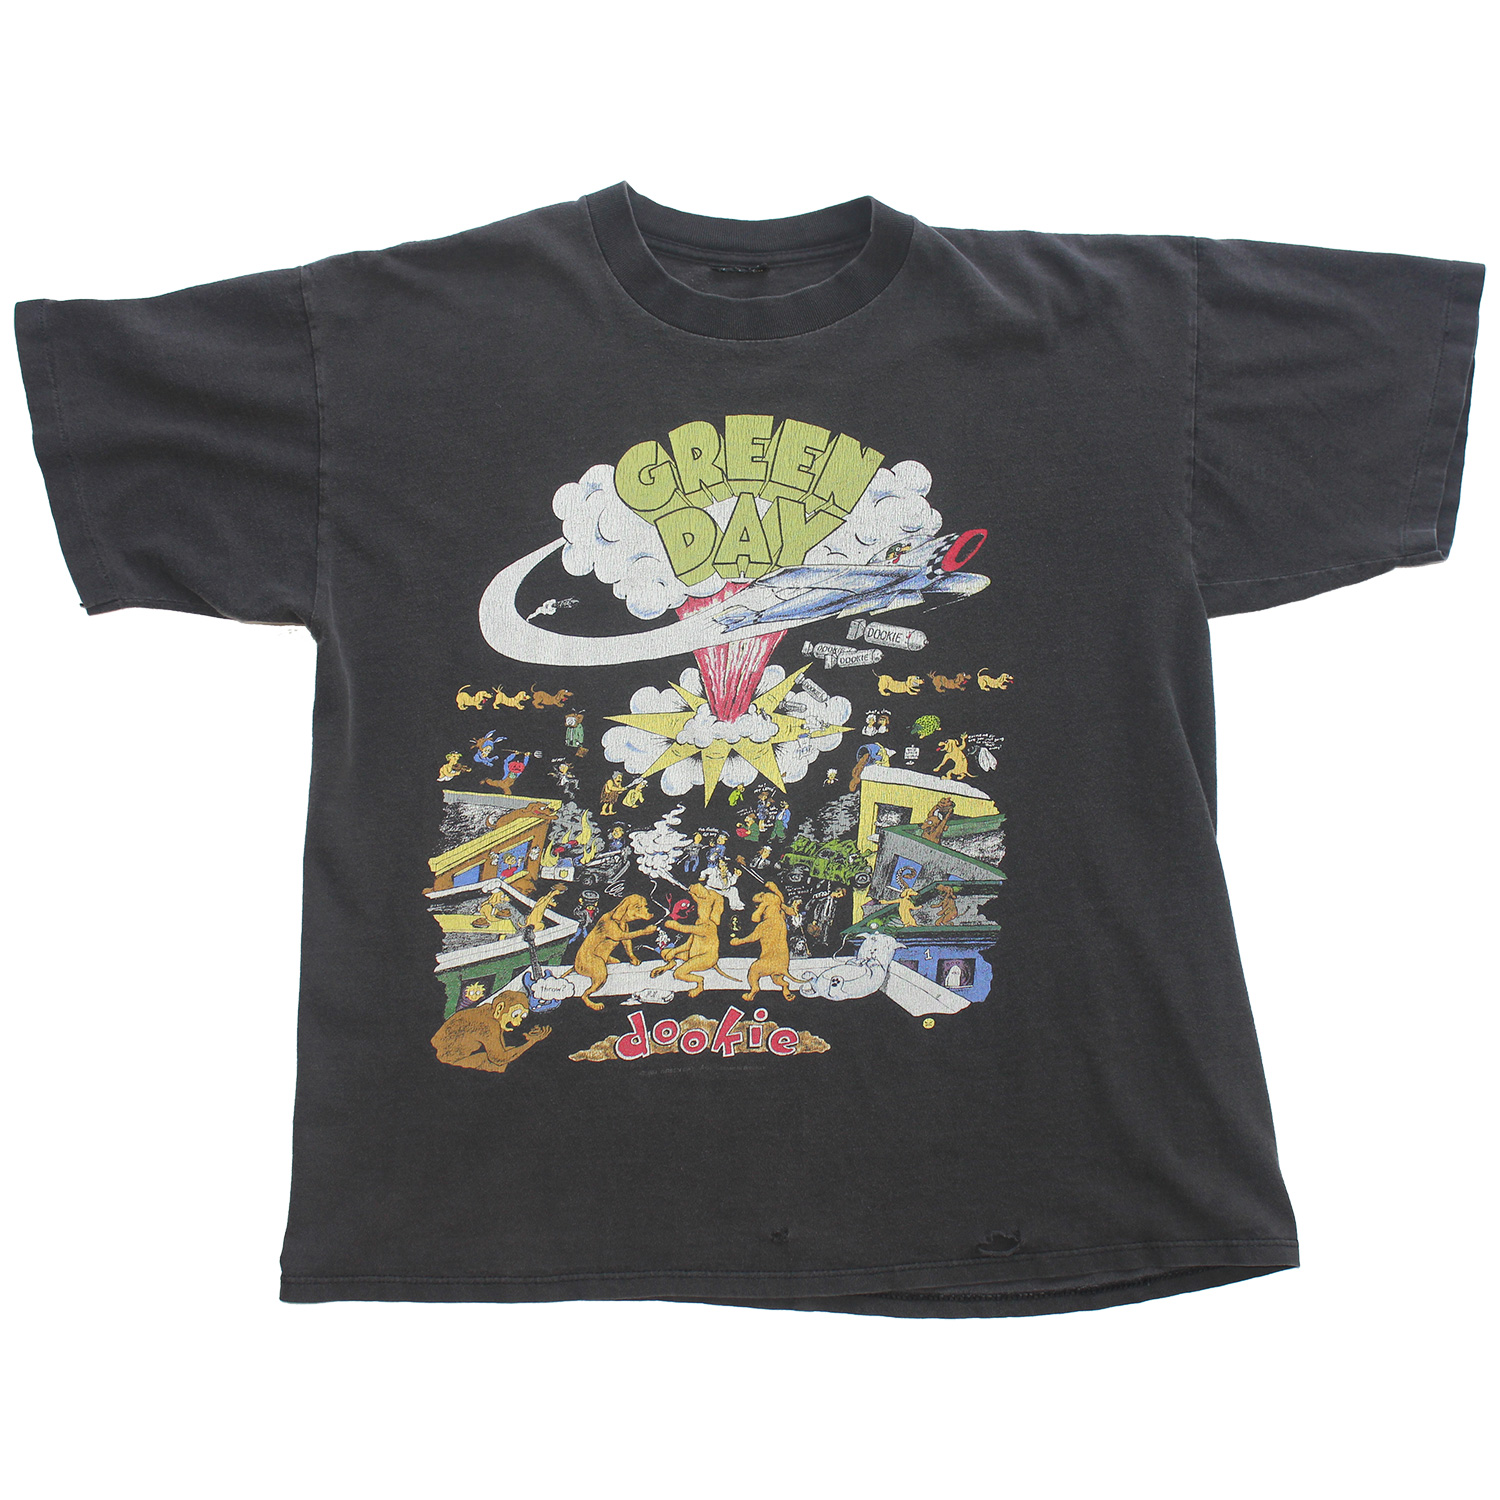 Vintage Green Day Dookie Album Cover T-shirt, Front